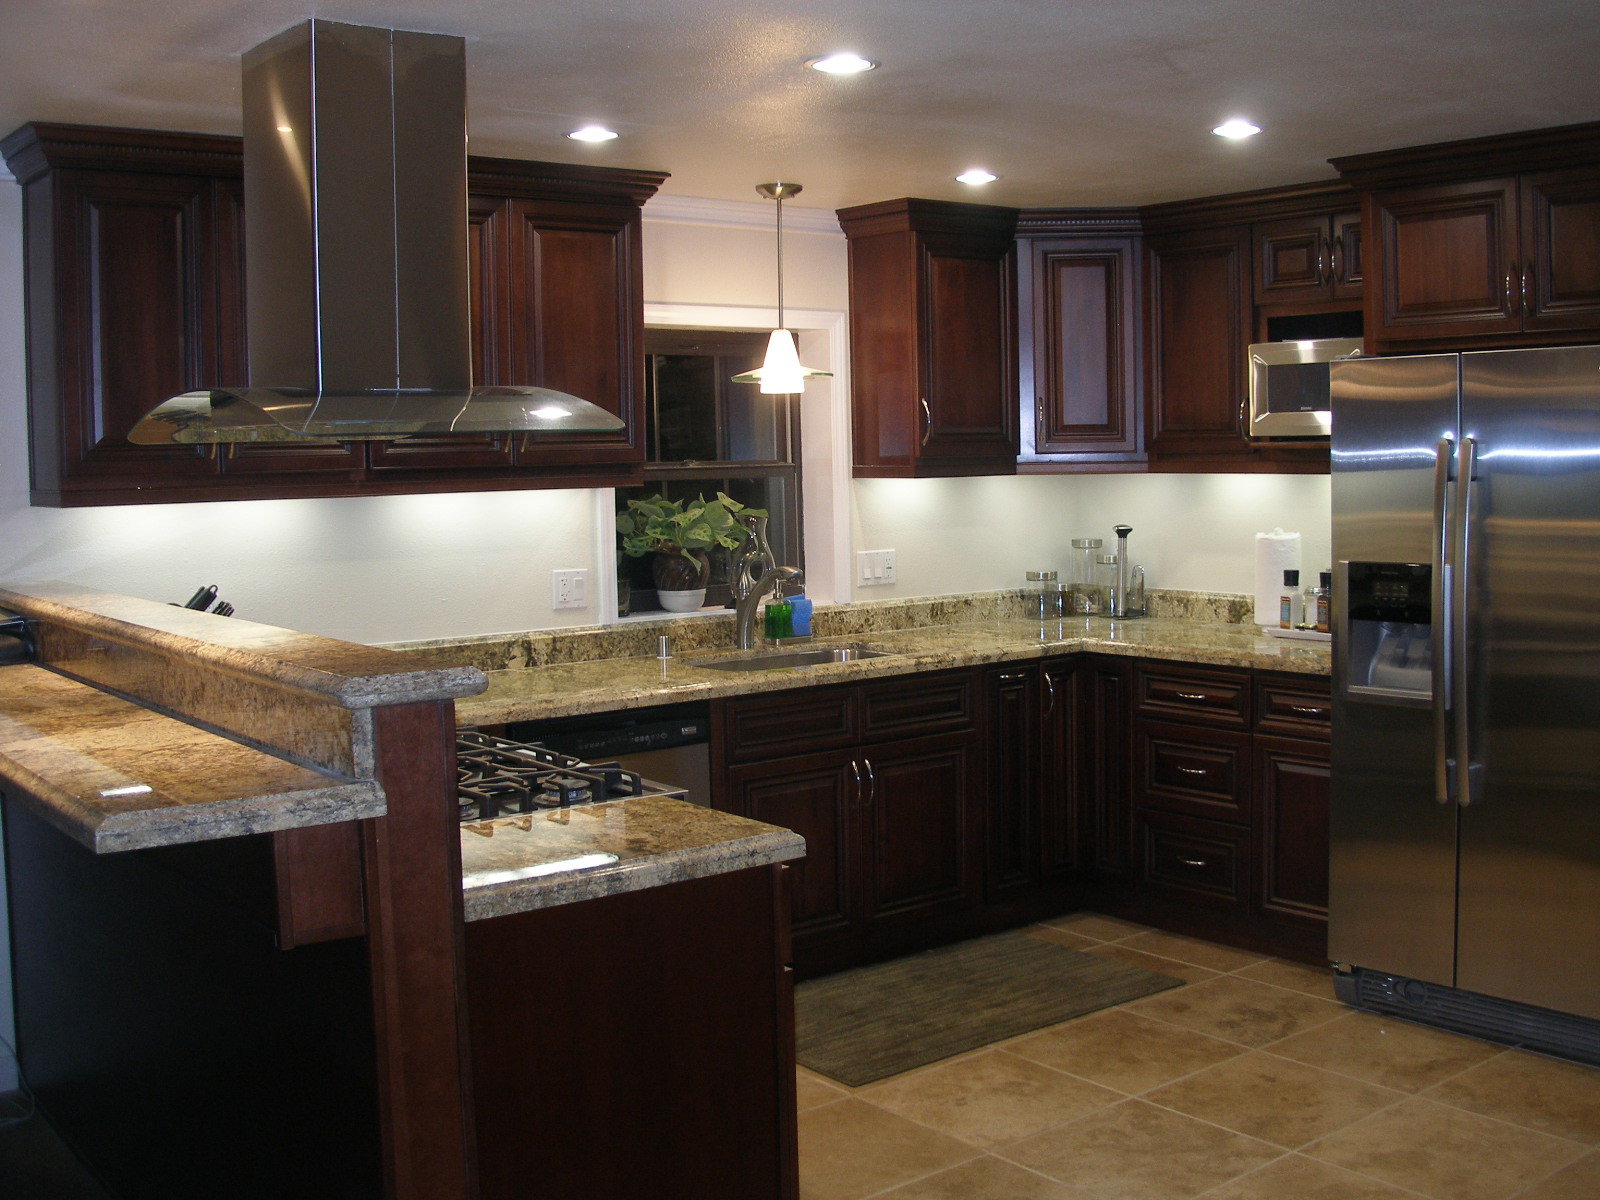 Kitchen Remodel Ideas Pictures
 Kitchen Remodeling